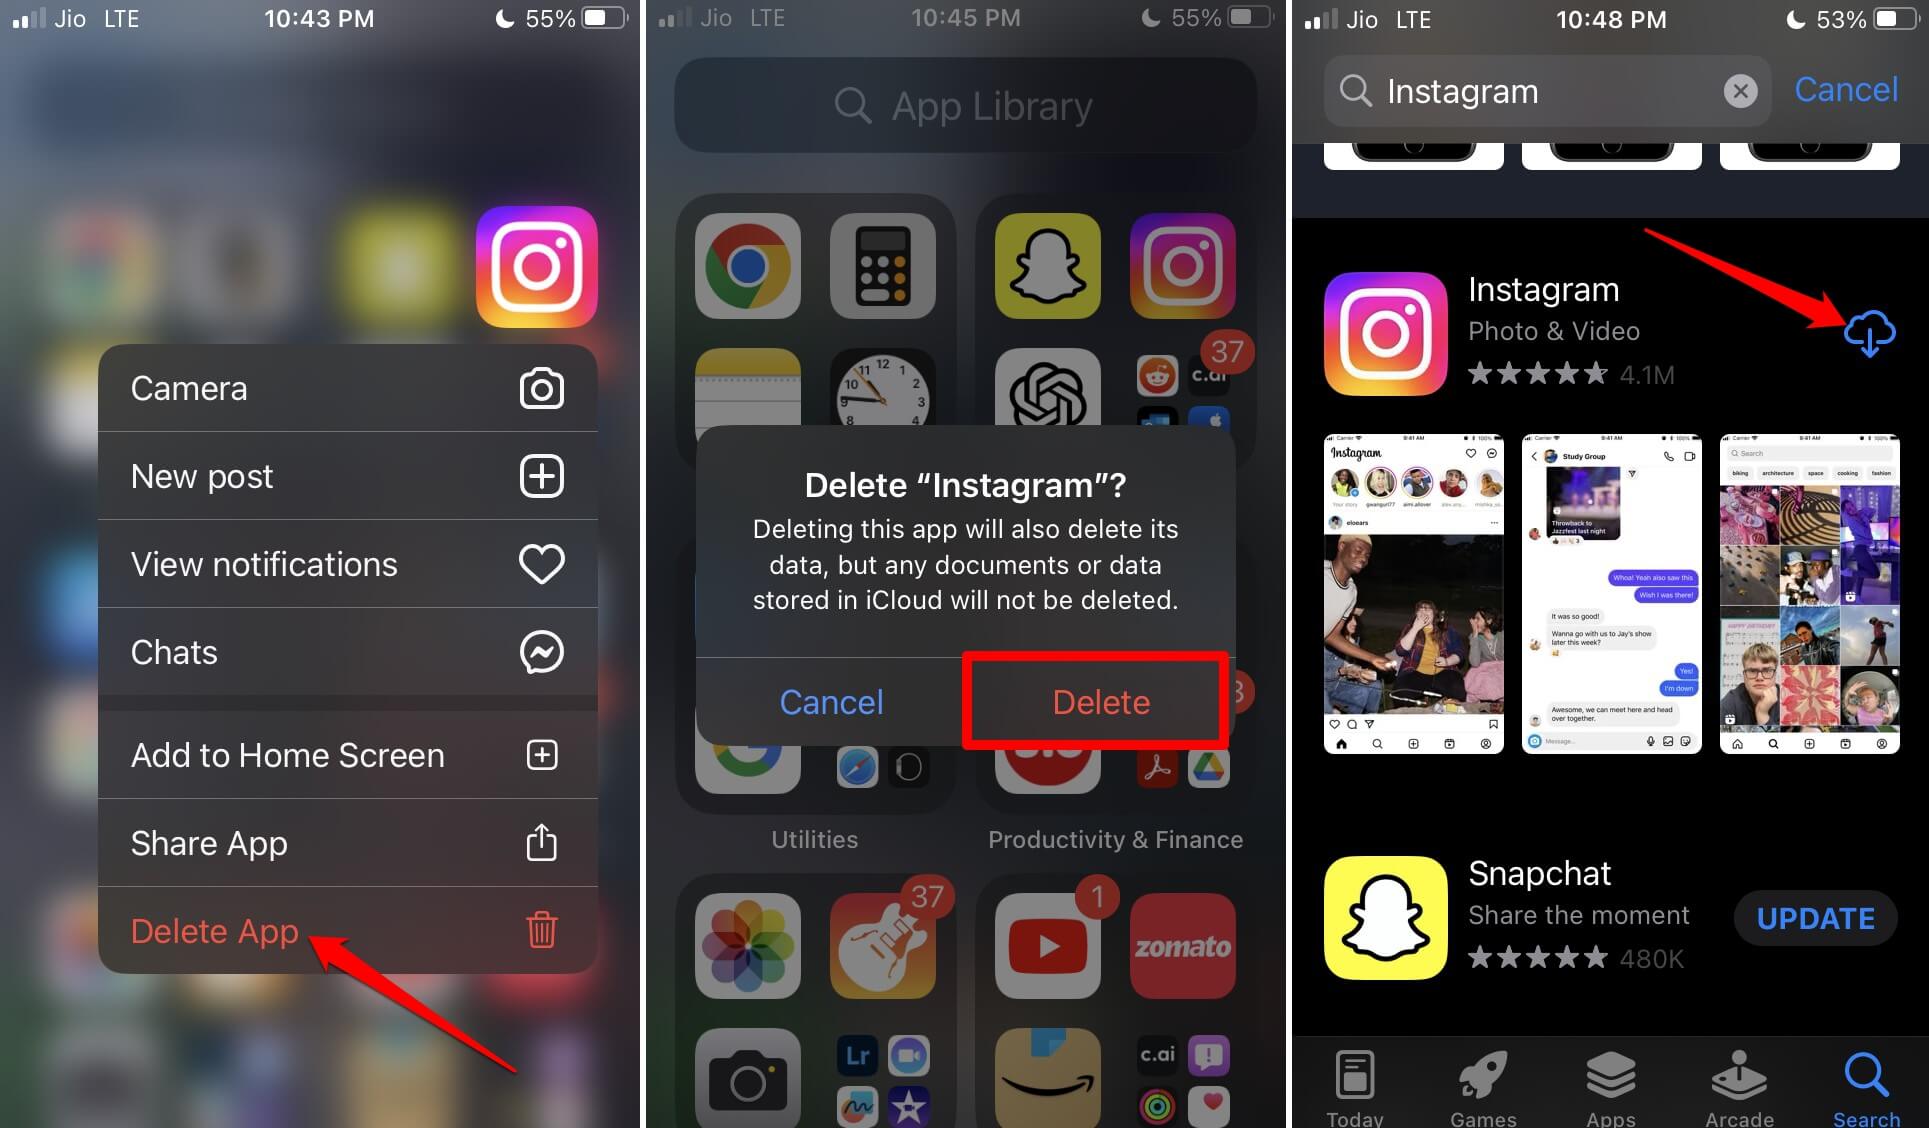 delete Instagram from iPhone and reinstall the app